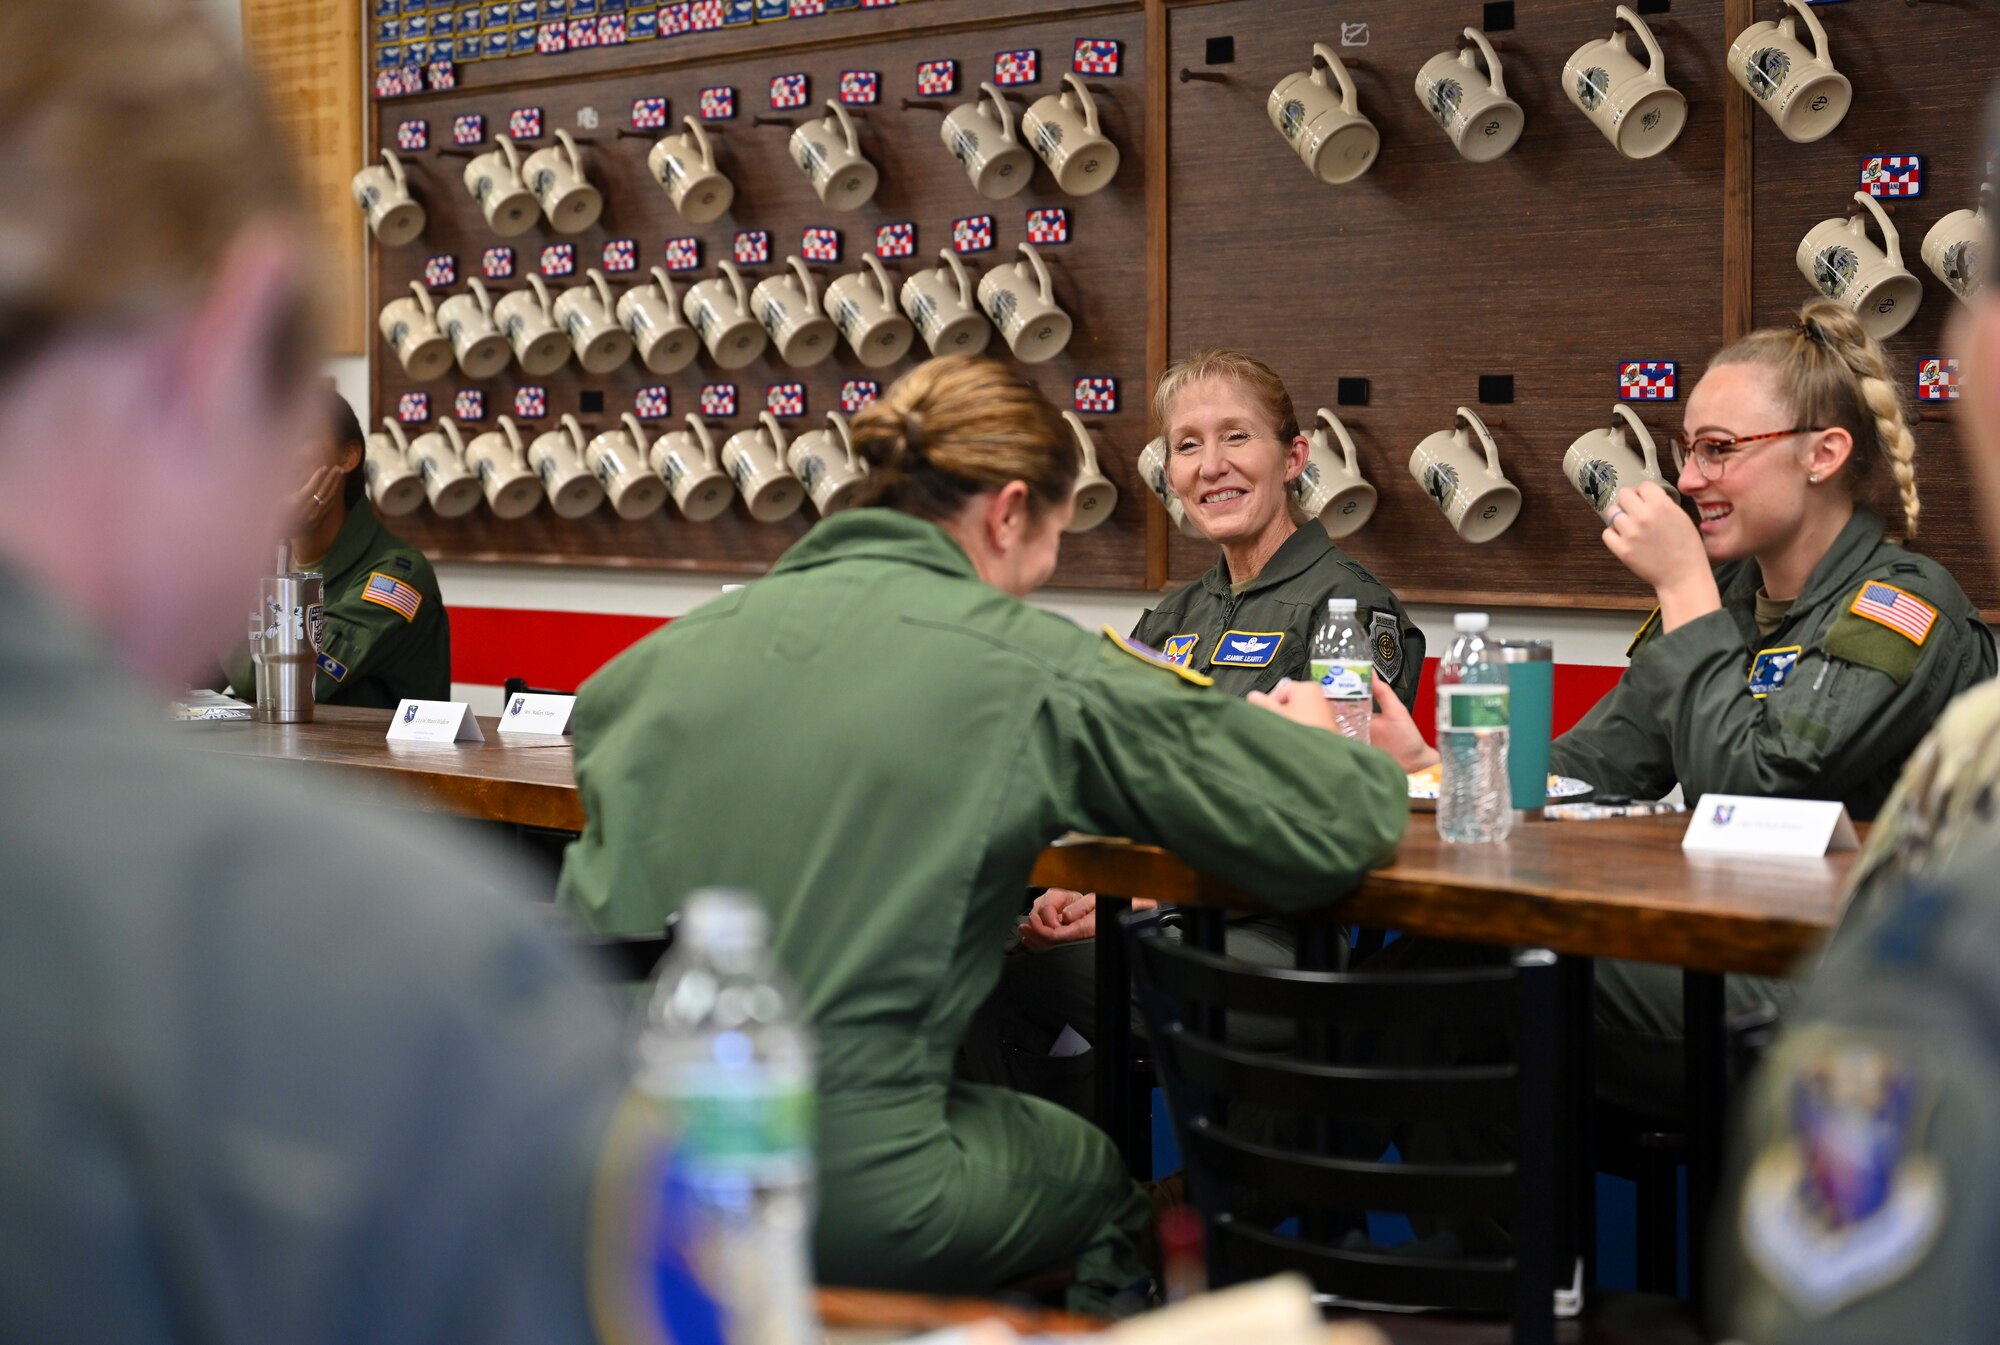 U.S. Air Force Maj. Gen. Jeannie Leavitt, Department of the Air Force chief of safety, Headquaters U.S. Air Force Arlington, VA., and Air Force Safety Center commander, Kirtland Air Force Base, NM., converses with female Airmen during a Lean-in Lunch, Oct. 13, 2021, at the 41st Heritage Room on Columbus Air Force Base, Miss. Leavitt became the first female fighter pilot in United States Air Force in 1993.  (U.S Air Force photo by Airman 1st Class Jessica Haynie)